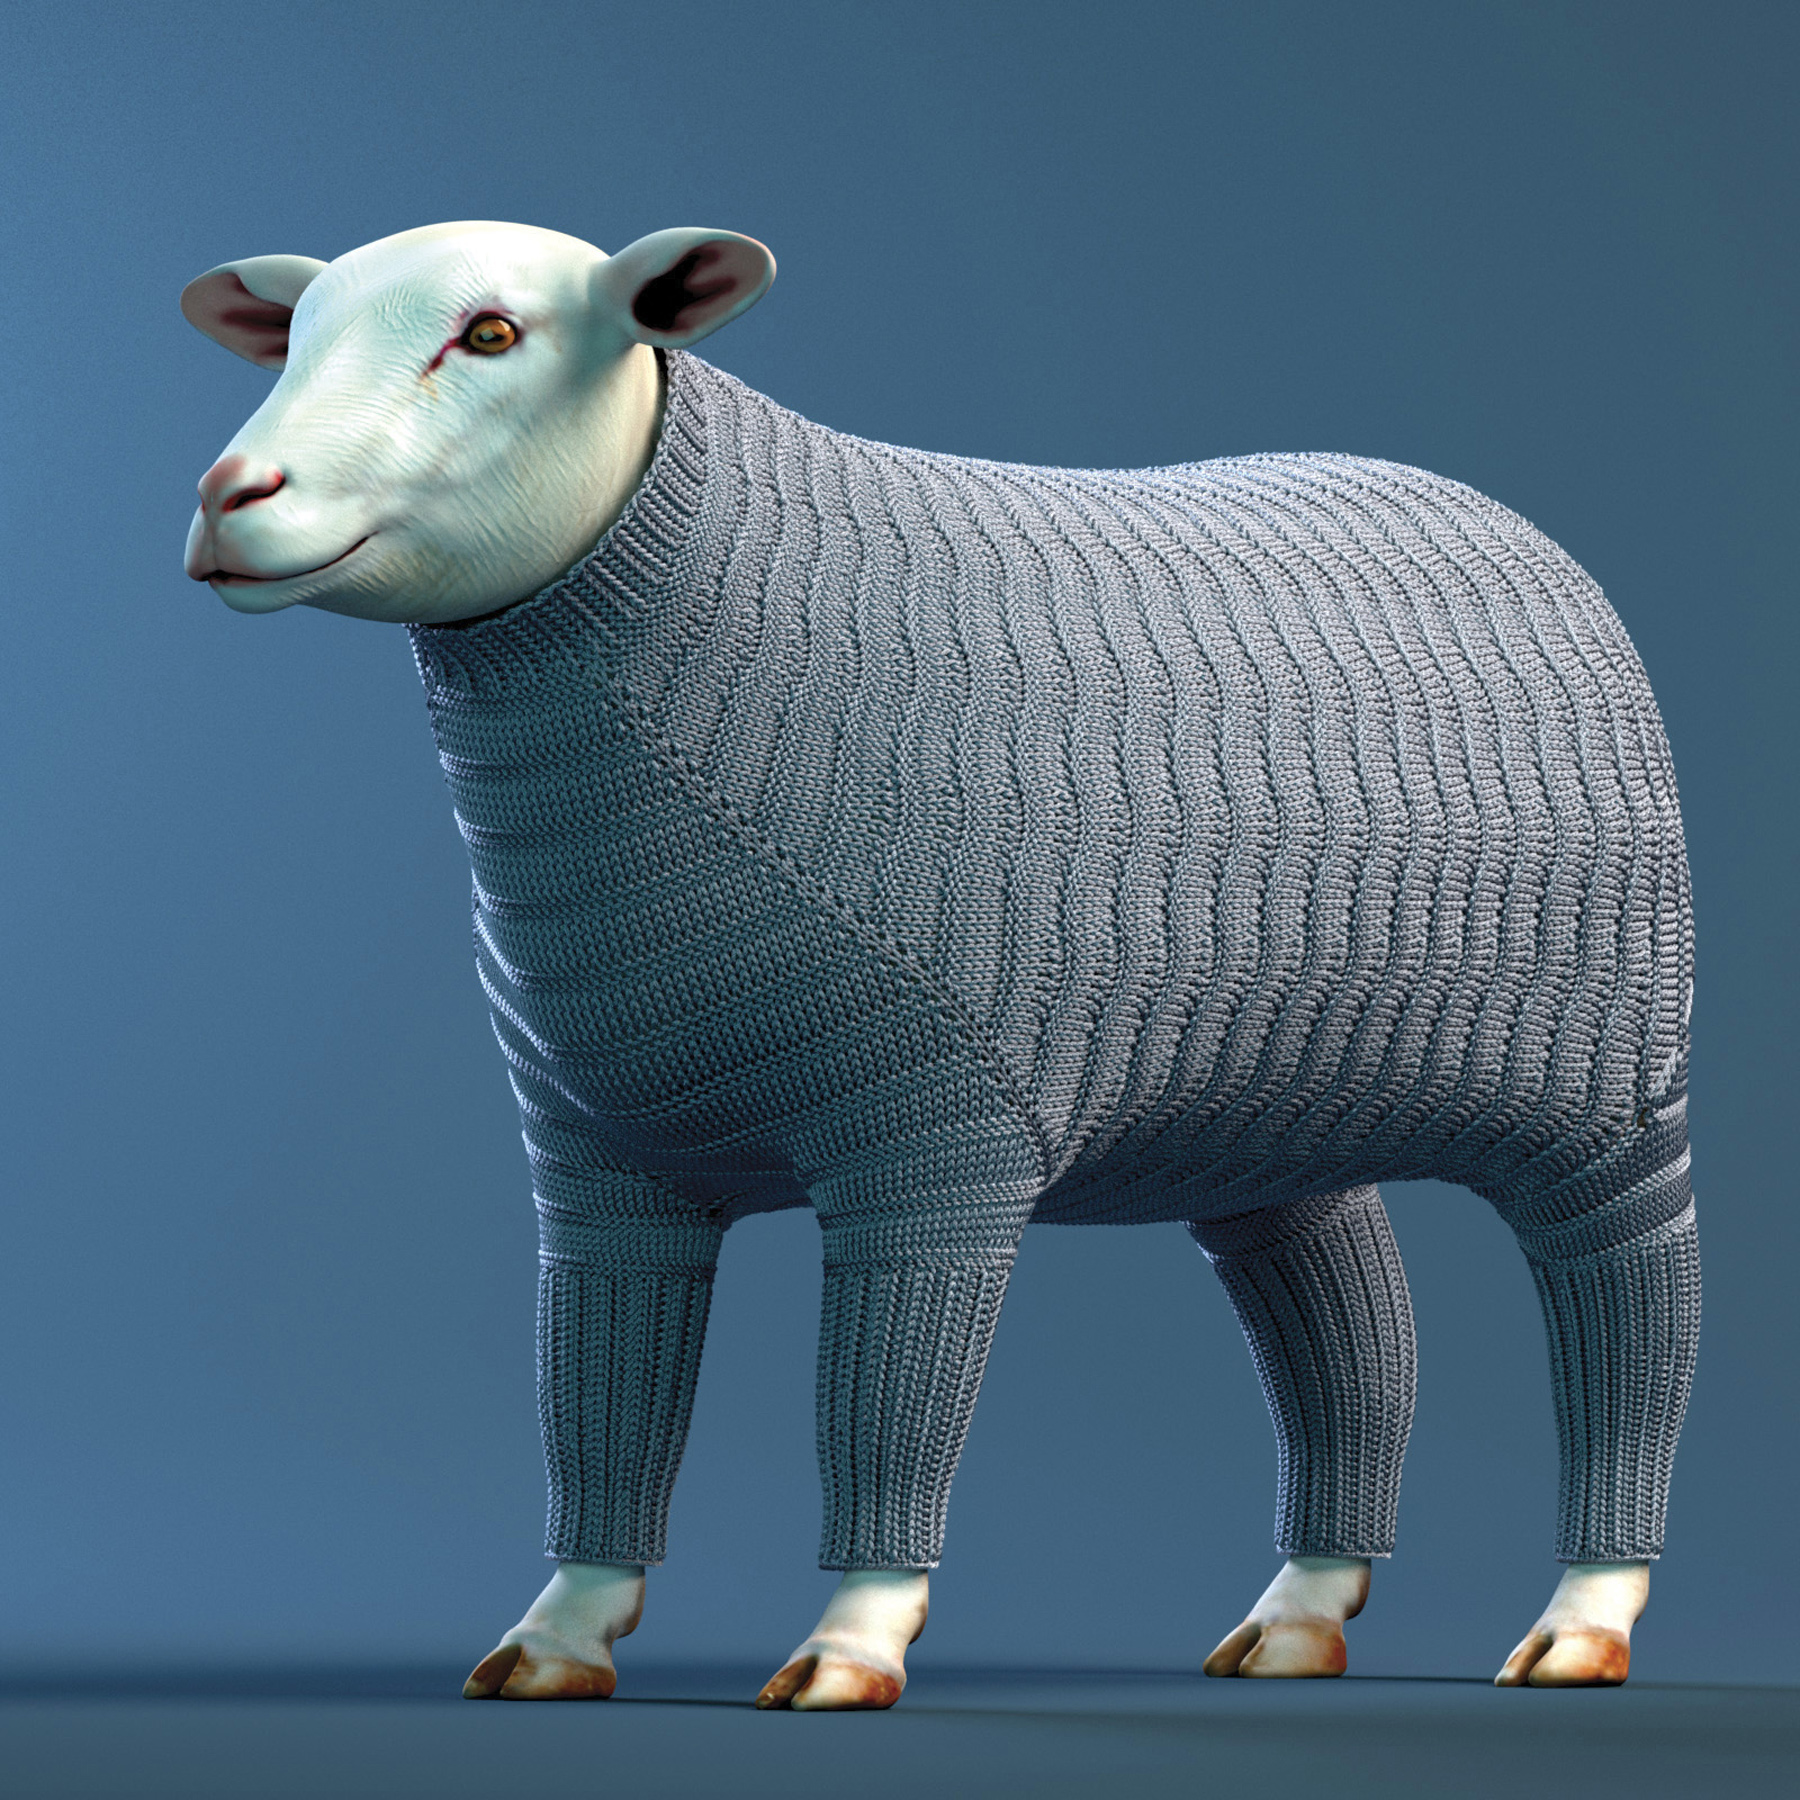 The computer simulation shows a knitted sweater dress for a sheep with a ridged feather pattern, prepared using University of Utah compter scientist Cem Yuksel's knitted-garment modeling technique.